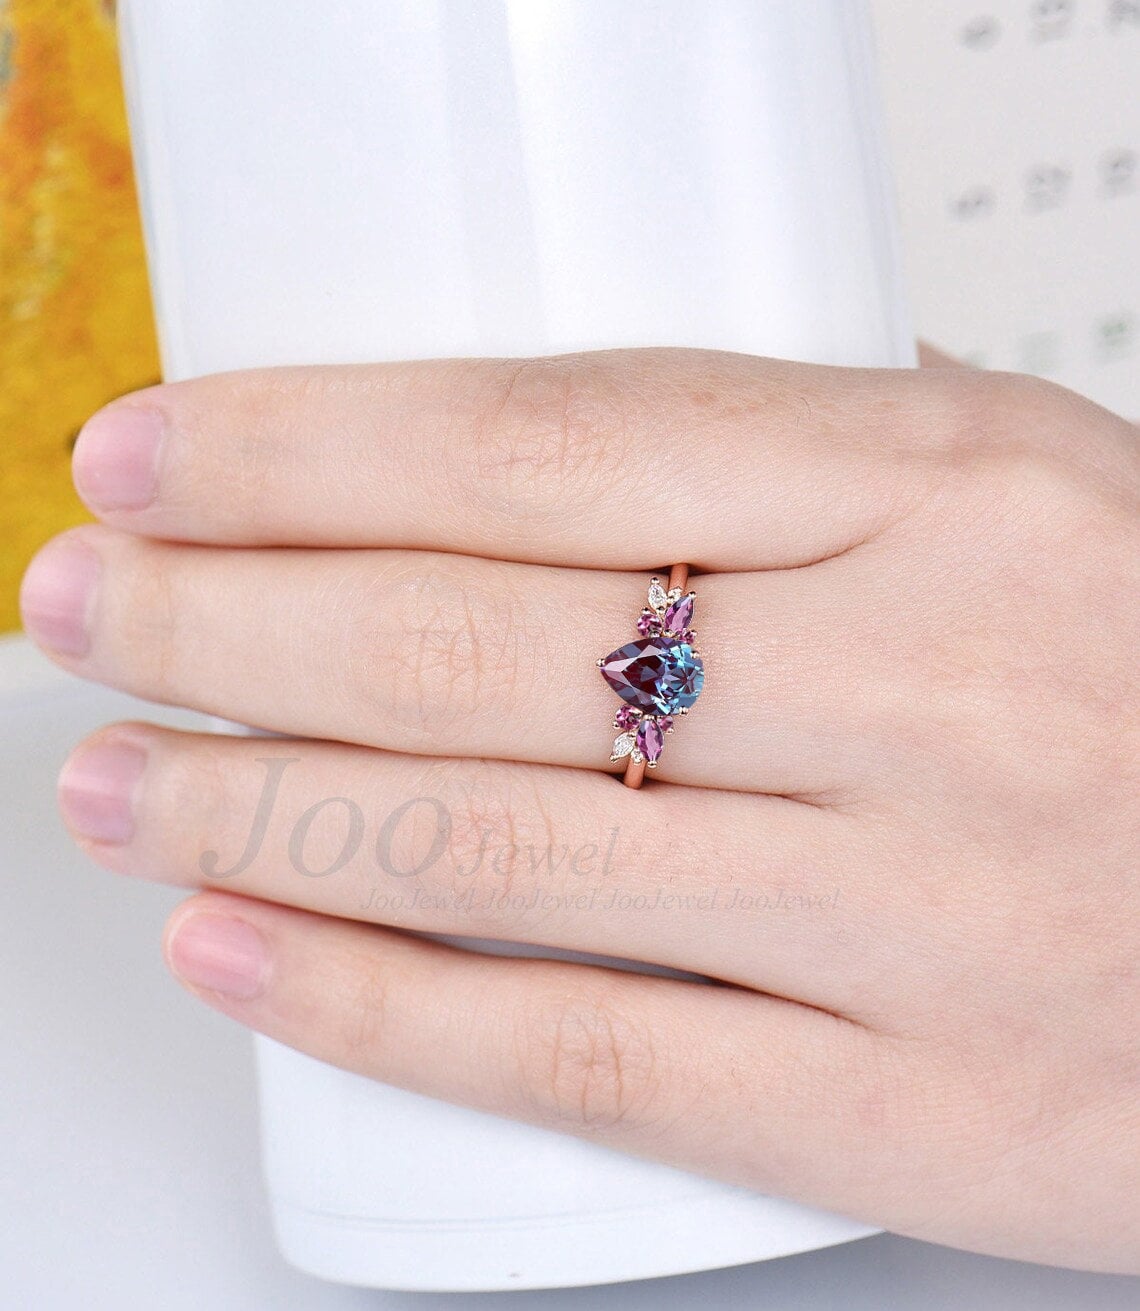 Cluster Engagement Ring 1.25ct Pear Shaped Color-Change Alexandrite Ring Vintage Pink Tourmaline Ring Personalized Birthday Anniversary Gift